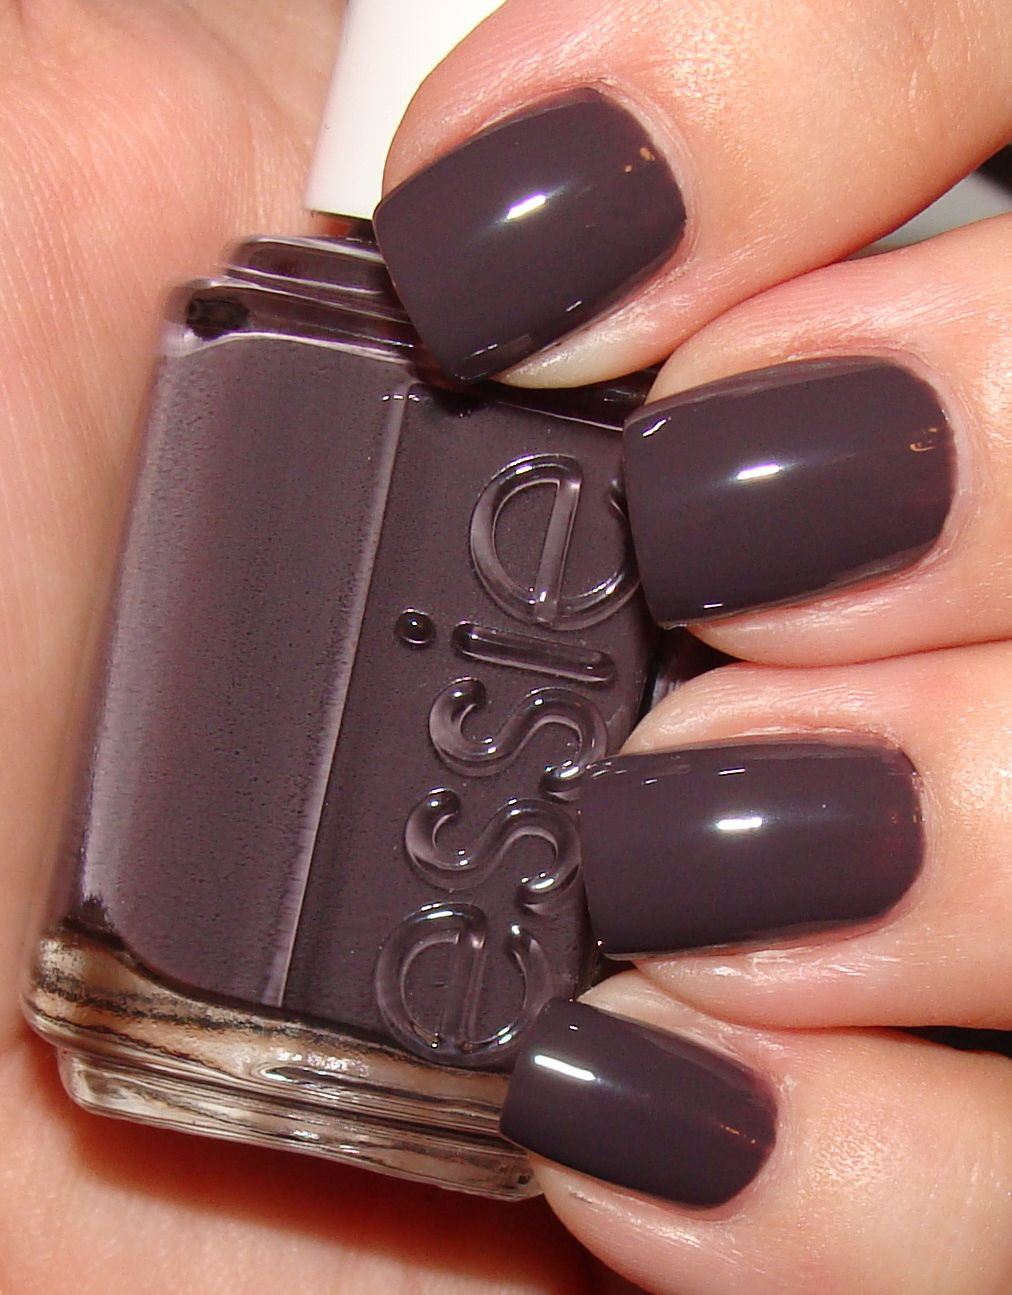 Hot New Nail Colors
 Essie "Smokin Hot" is one of my favorite colors at the